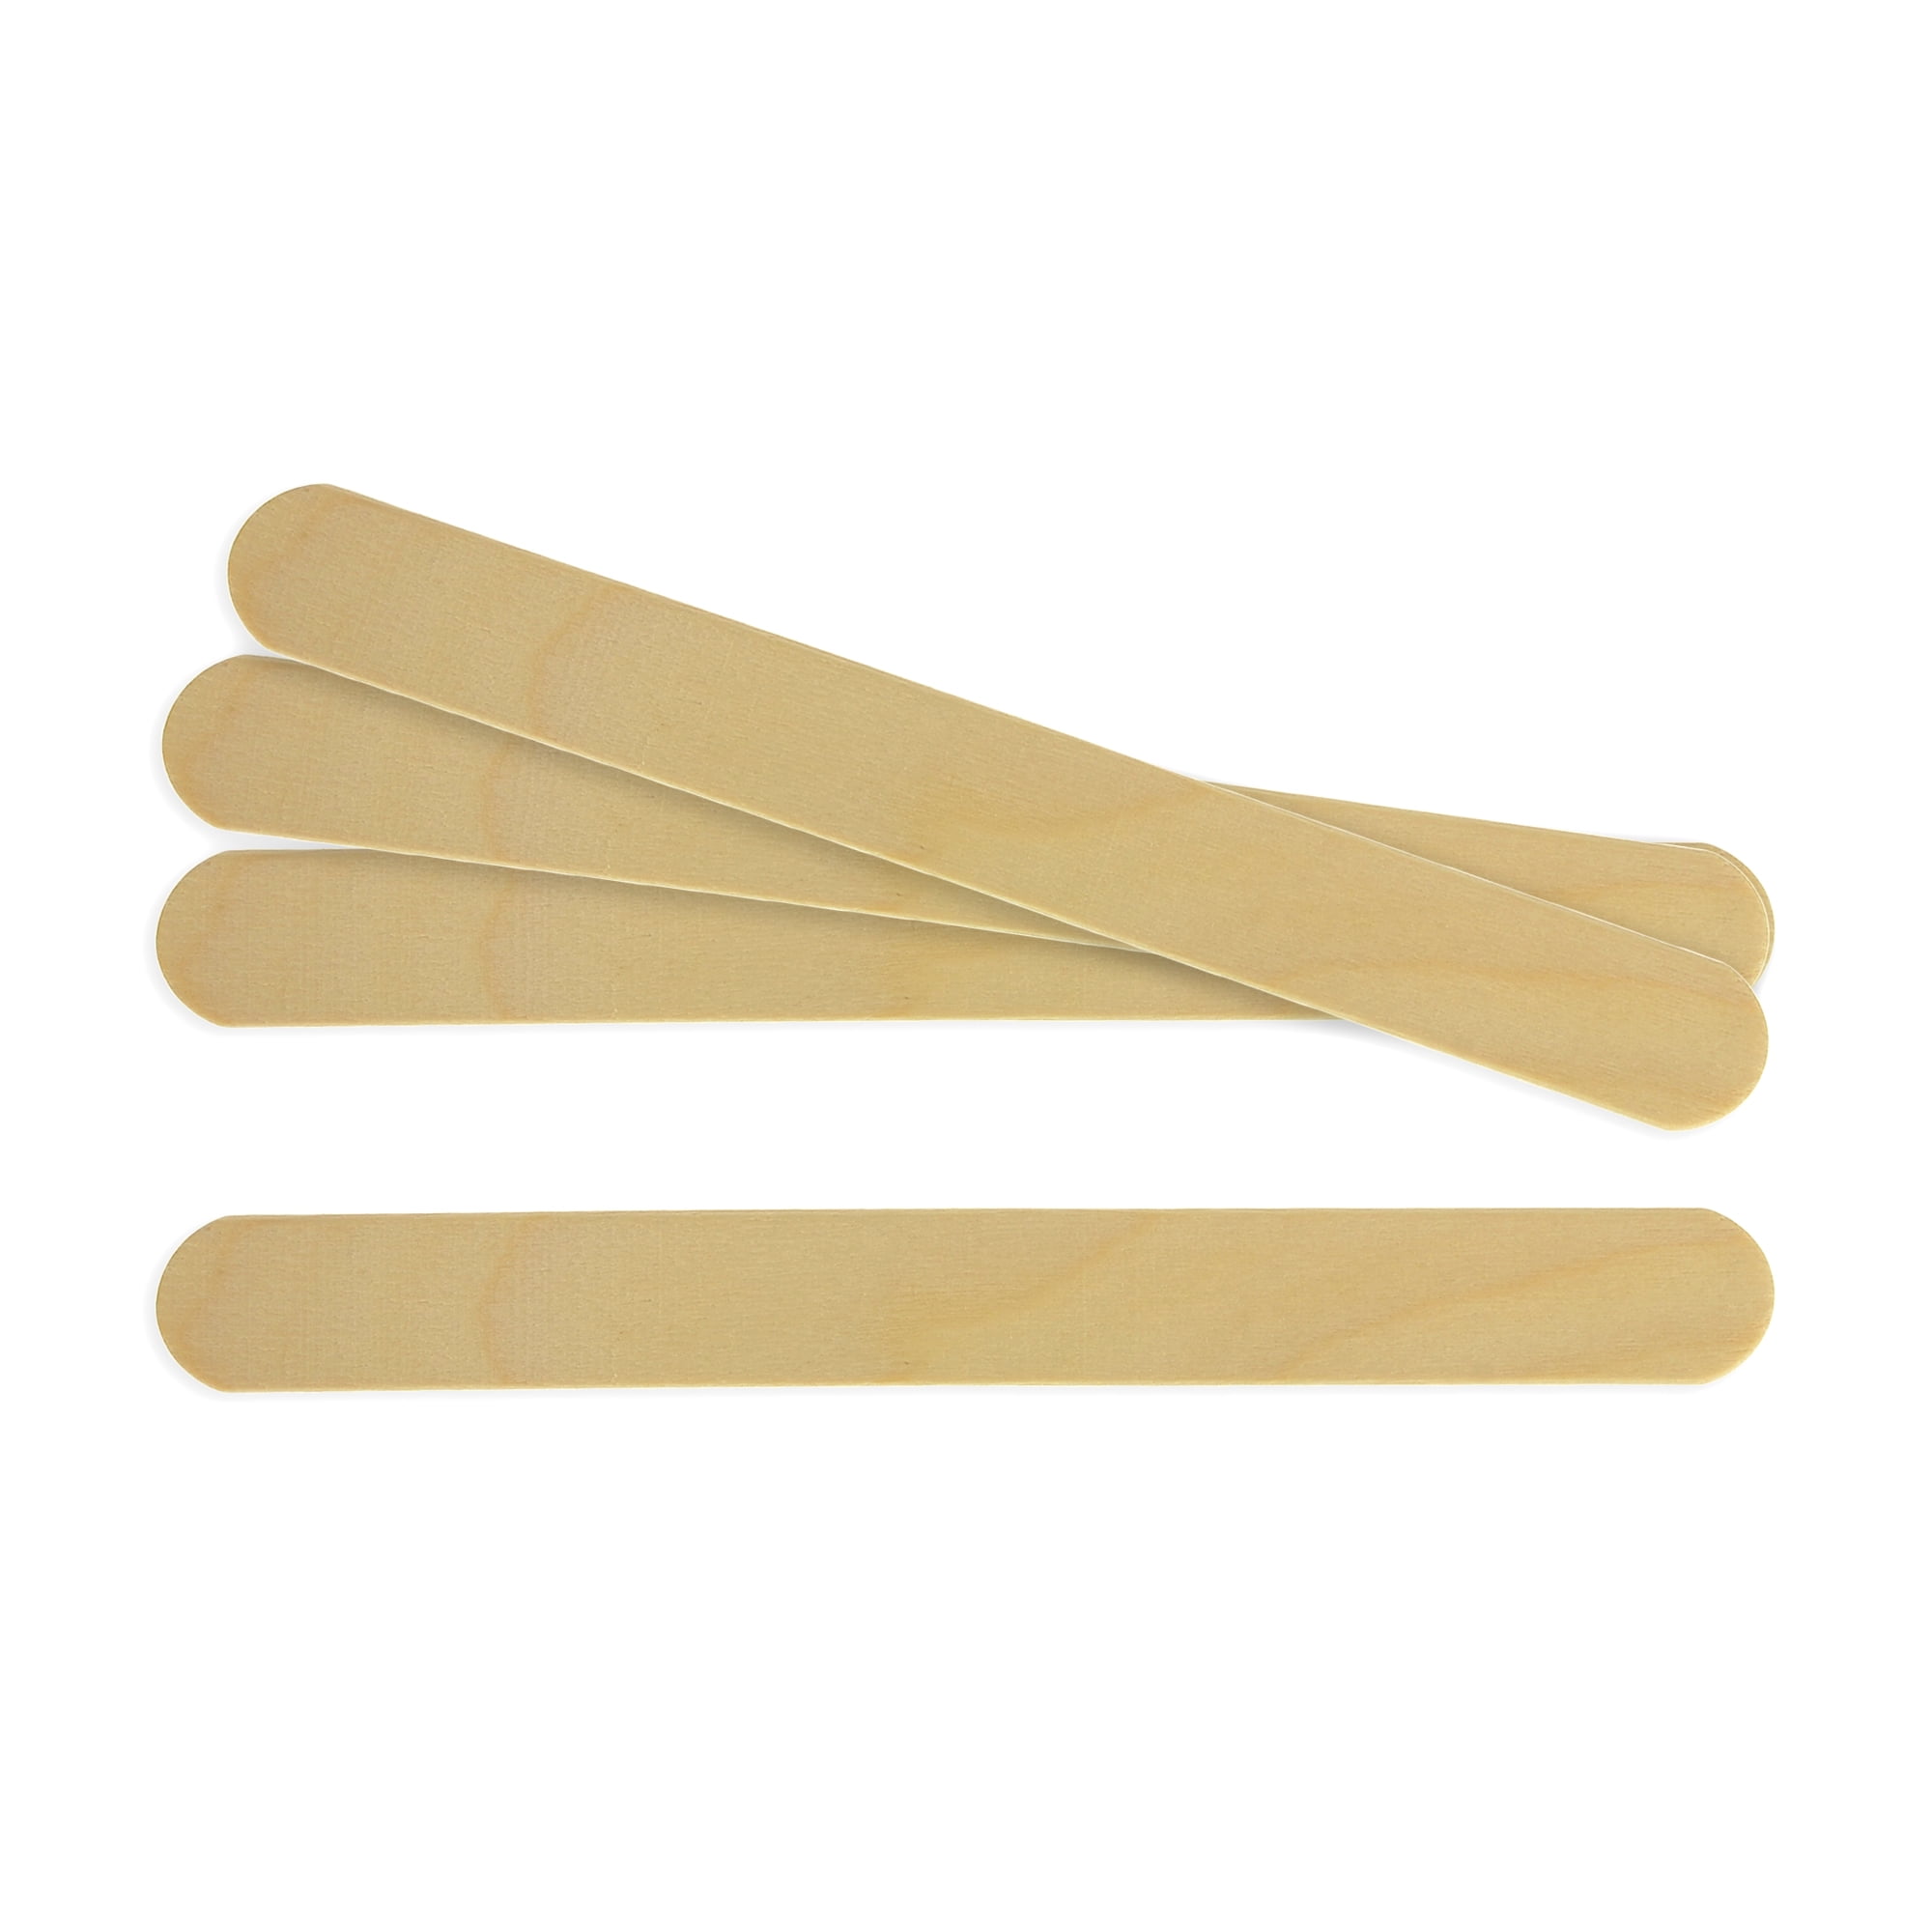 Dealmed 5.5” Junior Tongue Depressors – 100 Sterile Wood Tongue Depressor  Sticks, Can Be Used as Tongue Depressors for Crafts, in Medical Practice,  Emergency First Aid Kits and More in Dubai 